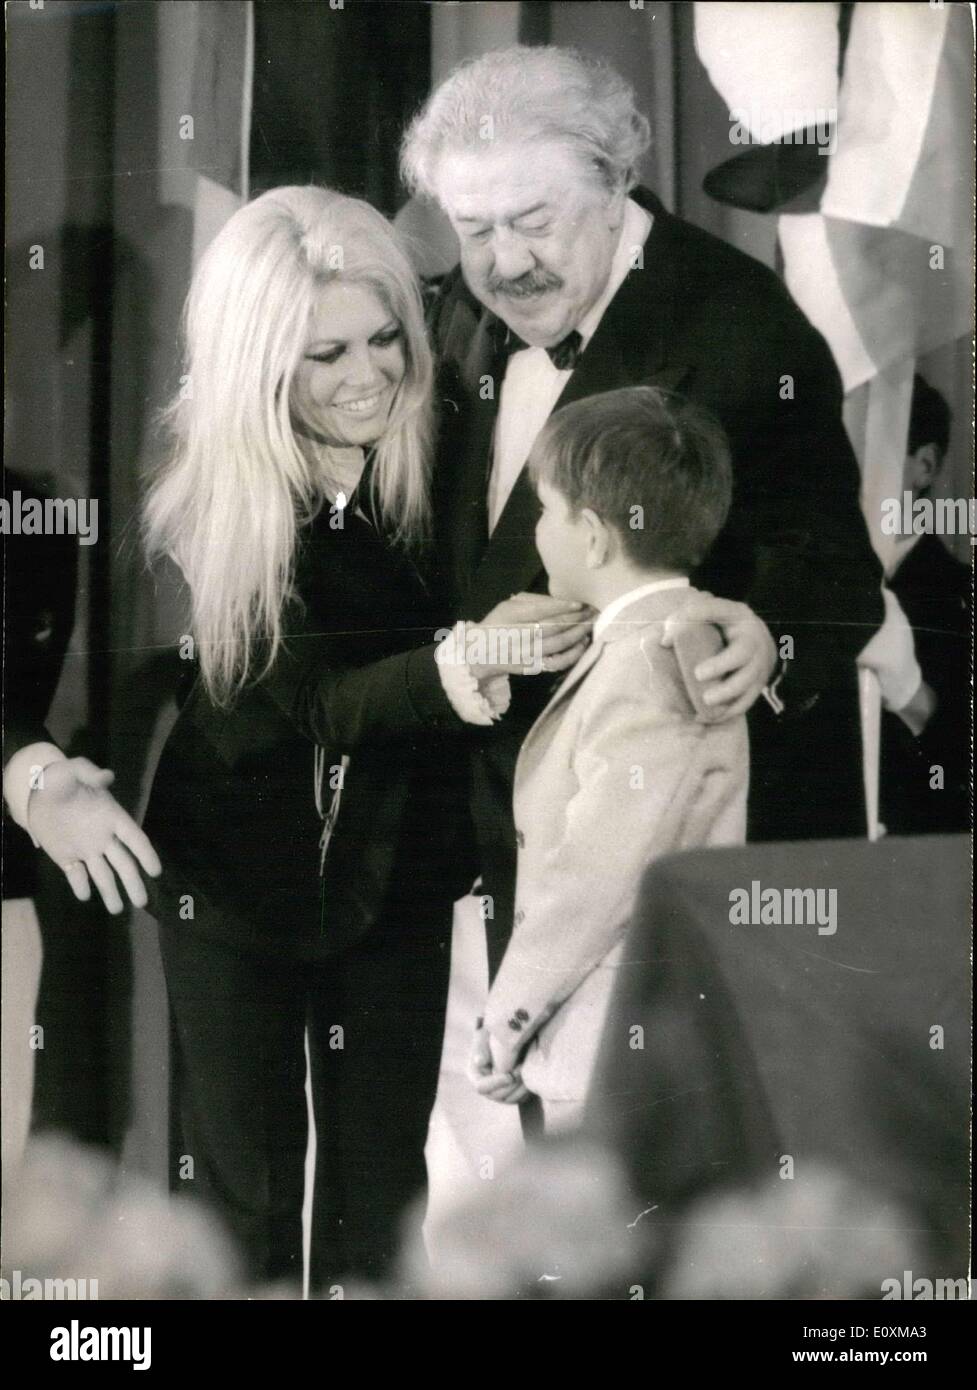 May 13, 1967 - Brigitte Bardot, and one of the most well-known actors, Michel Simon, were the unexpected guests at the closing night of the 20th Cannes Film Festival. Even though neither one of them participated in the Festival, they received the most applause.The arrival of Brigitte Bardot, ravishing in her black smoking jacket, signified that she had reconciled with Cannes. As for Michel Simon, the Festival decided to give him a gold medal in honor of his career Stock Photo